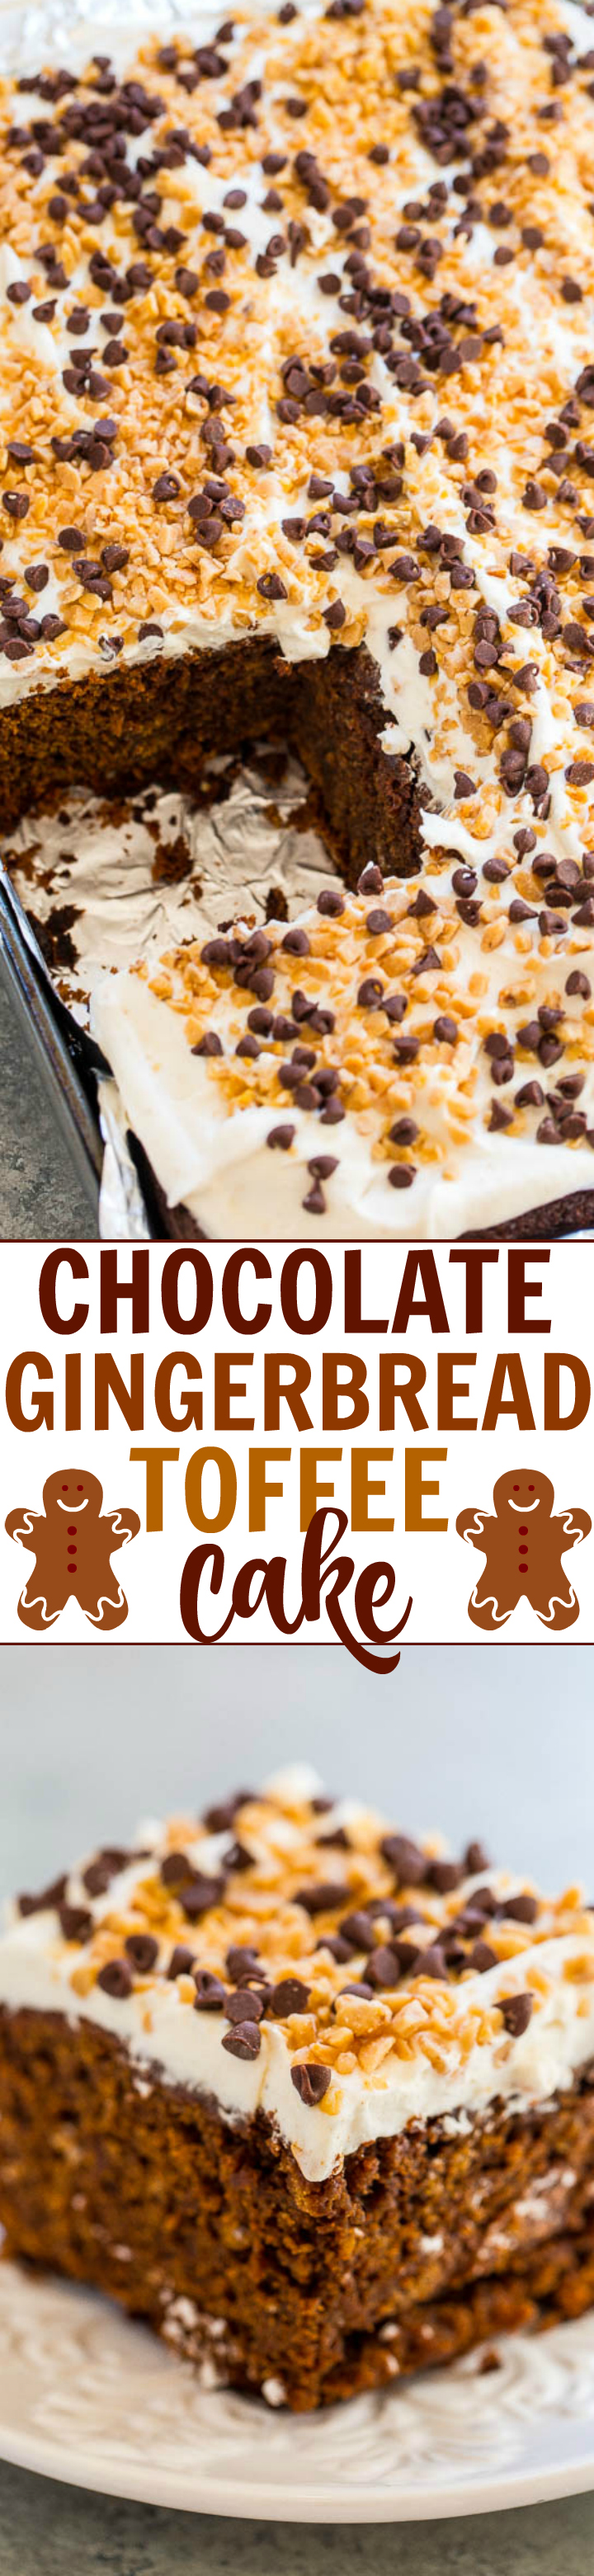 Chocolate Gingerbread Toffee Cake - An EASY, no mixer cake that's perfect for the holidays!! Chocolate and ginger are amazing together! The GINGER spiced whipped cream is the literal icing on this cake!!